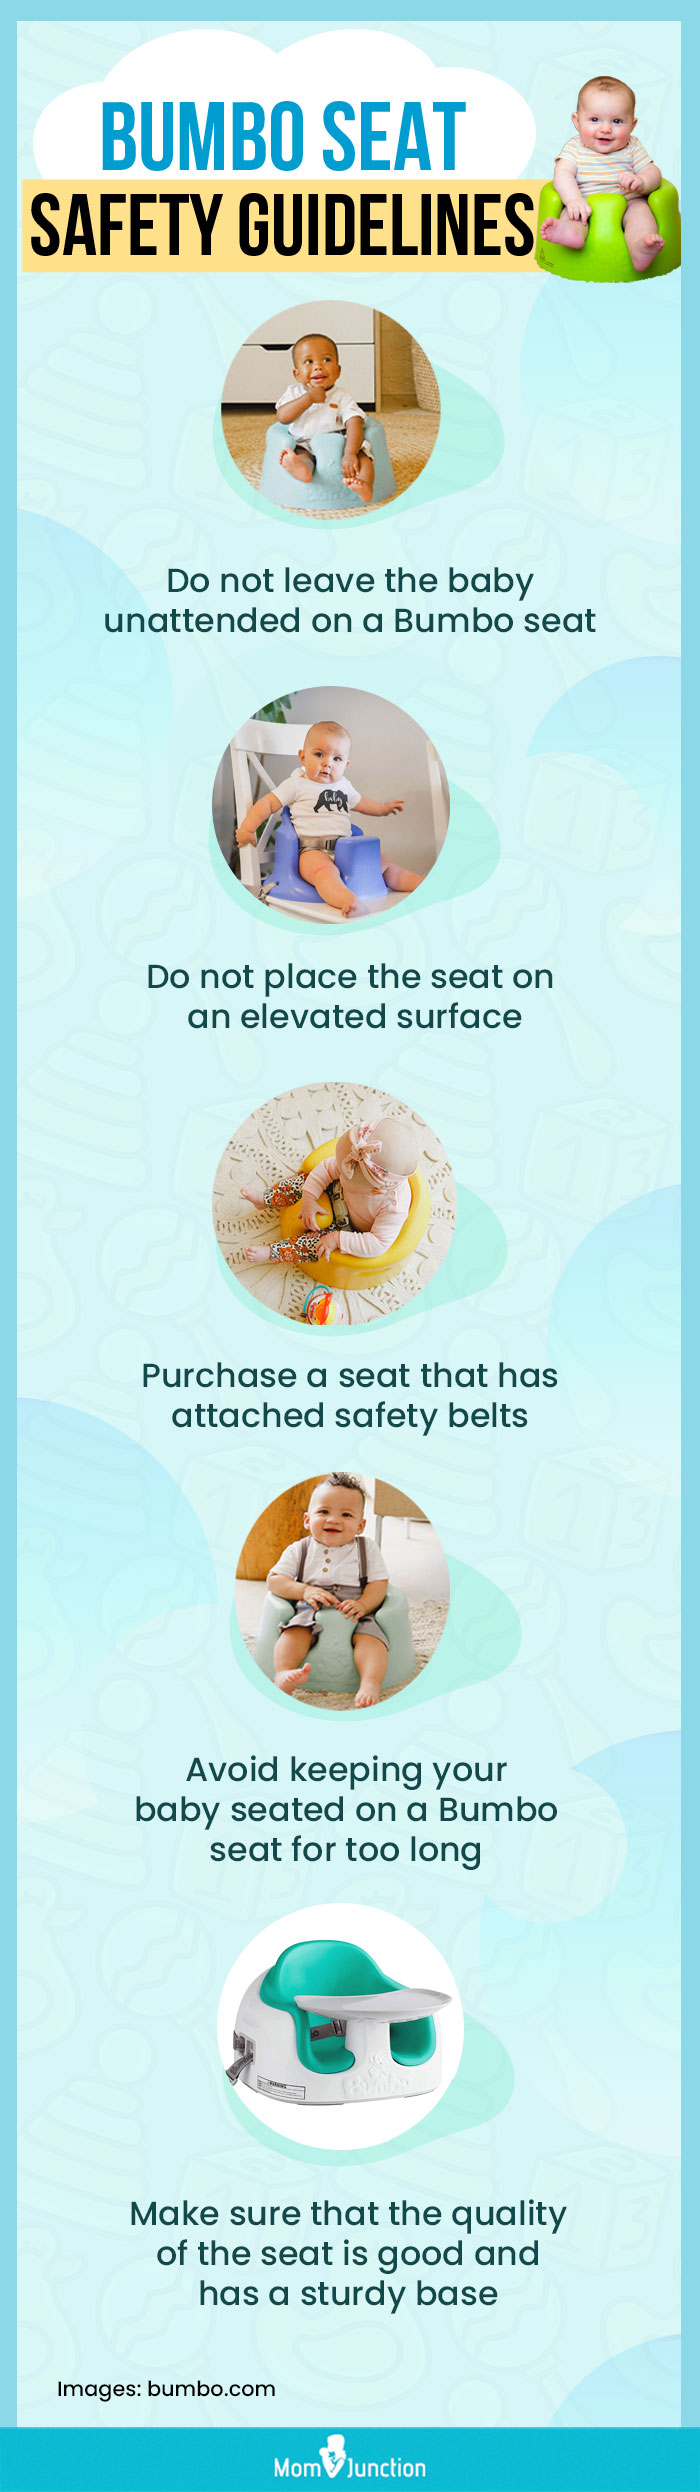 bumbo seat safety guidelines for babies [infographic]